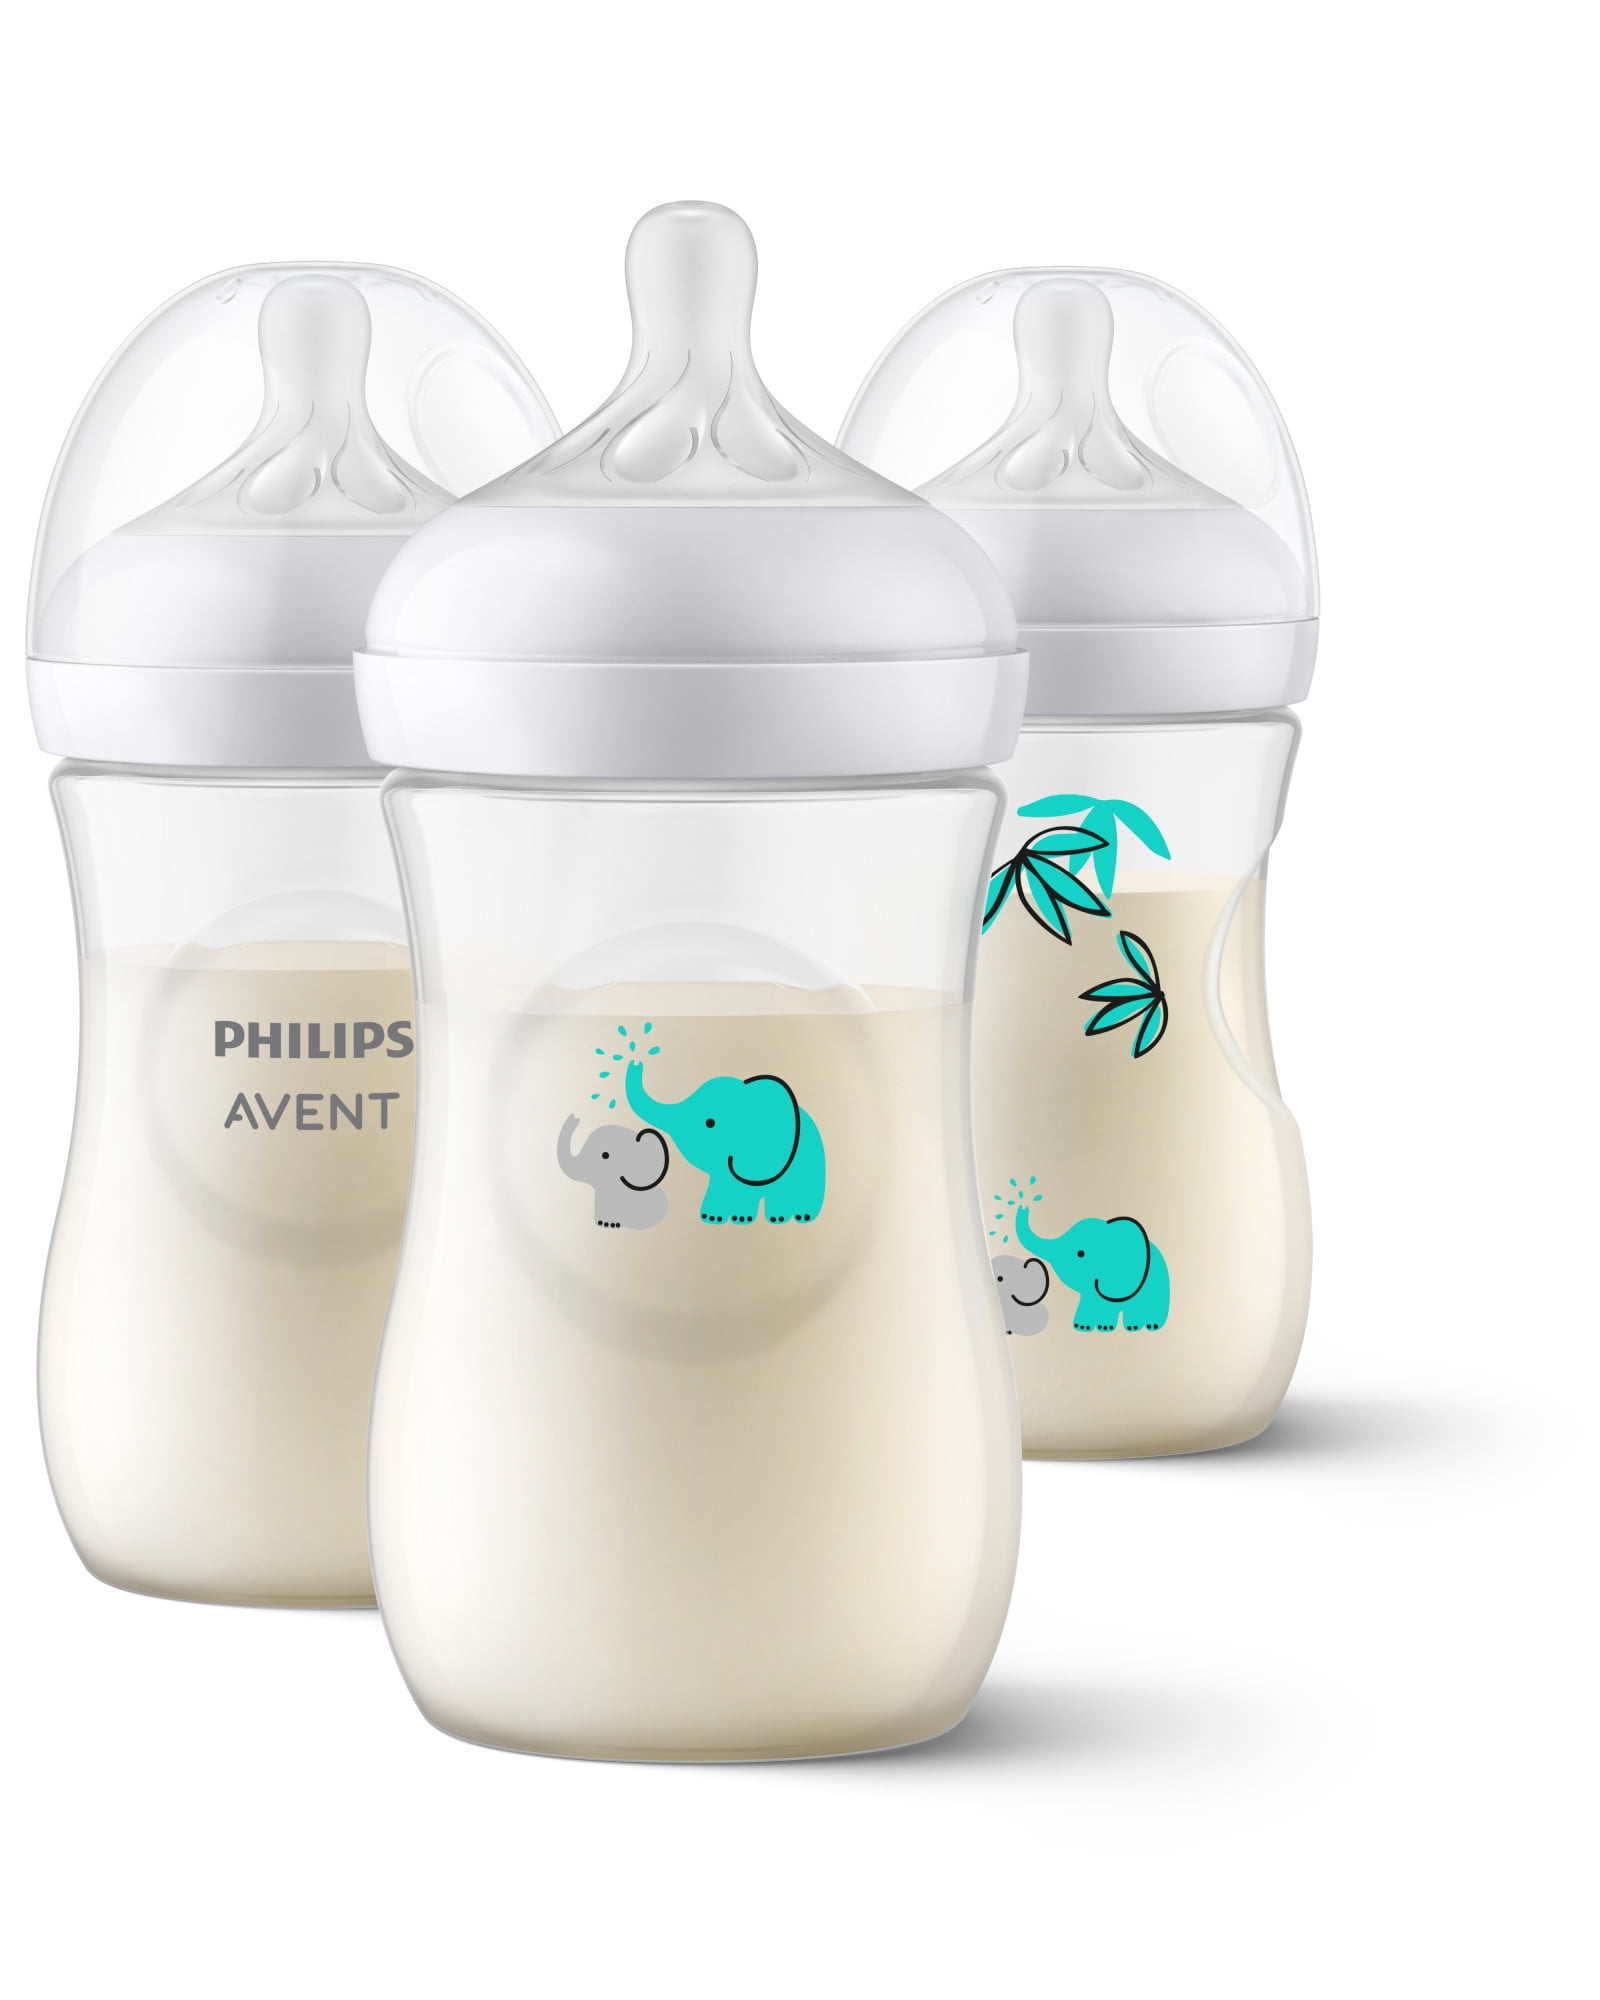  Philips AVENT Natural Baby Bottles with Natural Response  Nipple, with Manatee Design, 9oz, 4pk, SCY903/61 : Baby